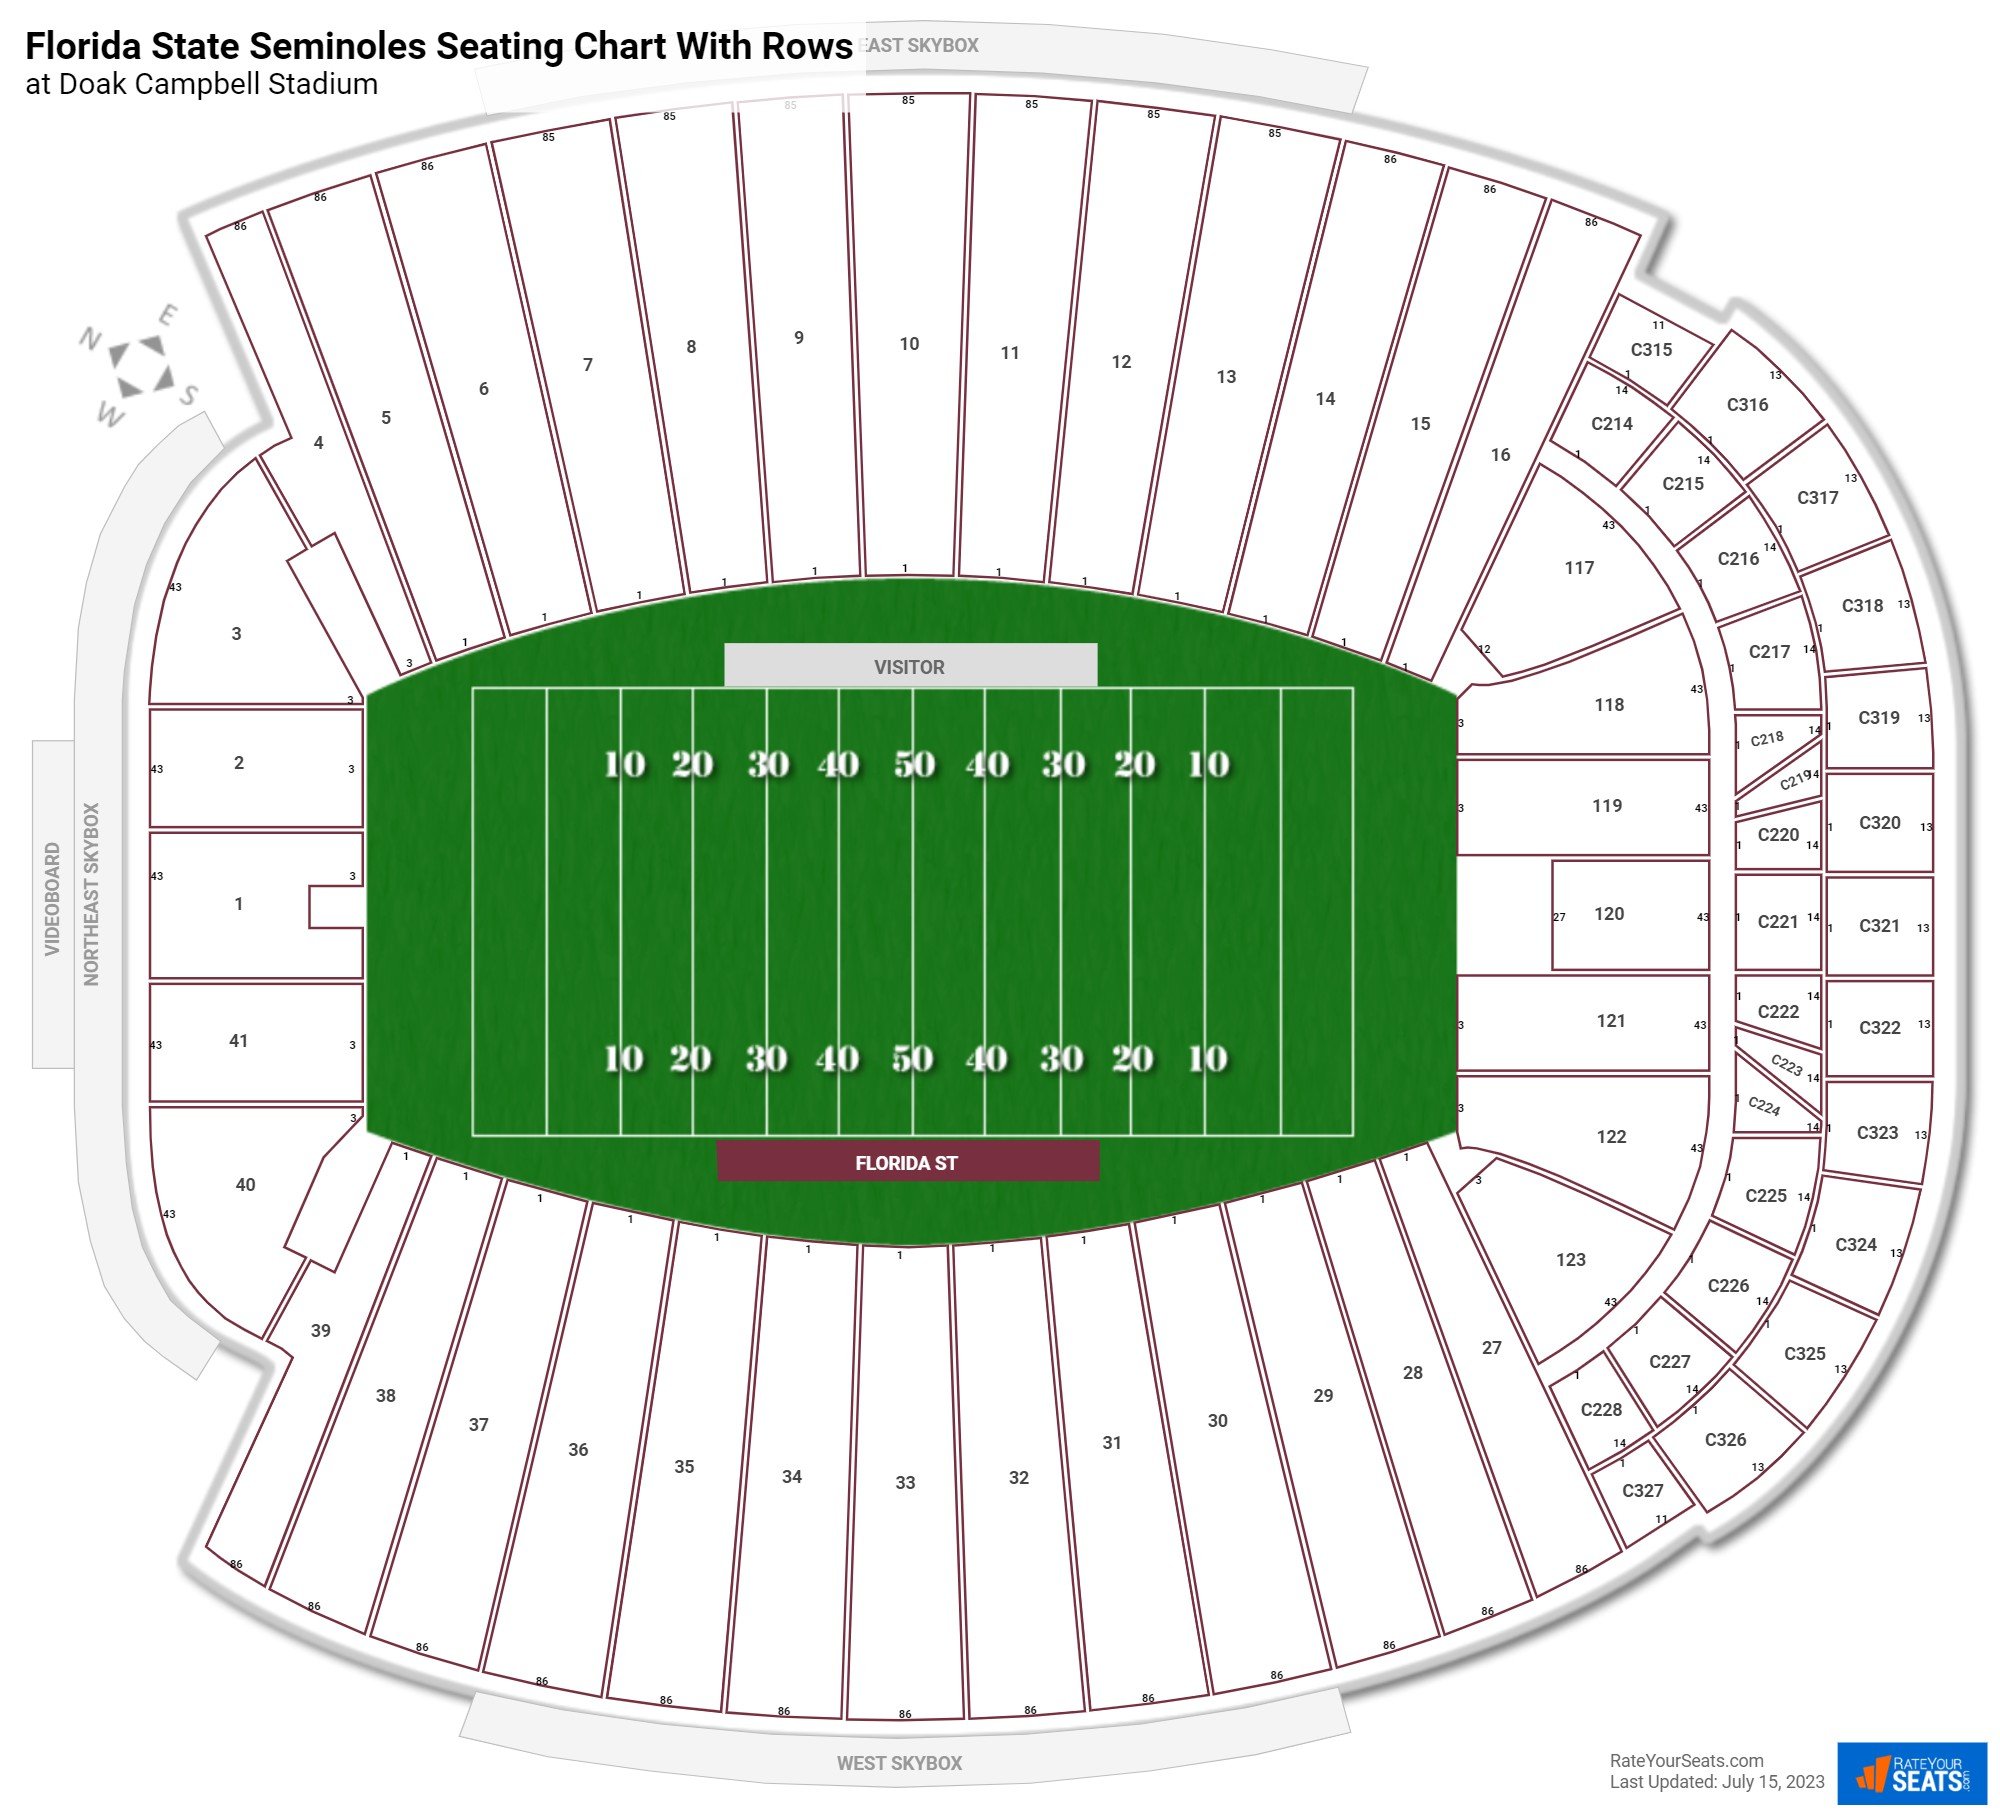 Doak Campbell Stadium seating chart with row numbers